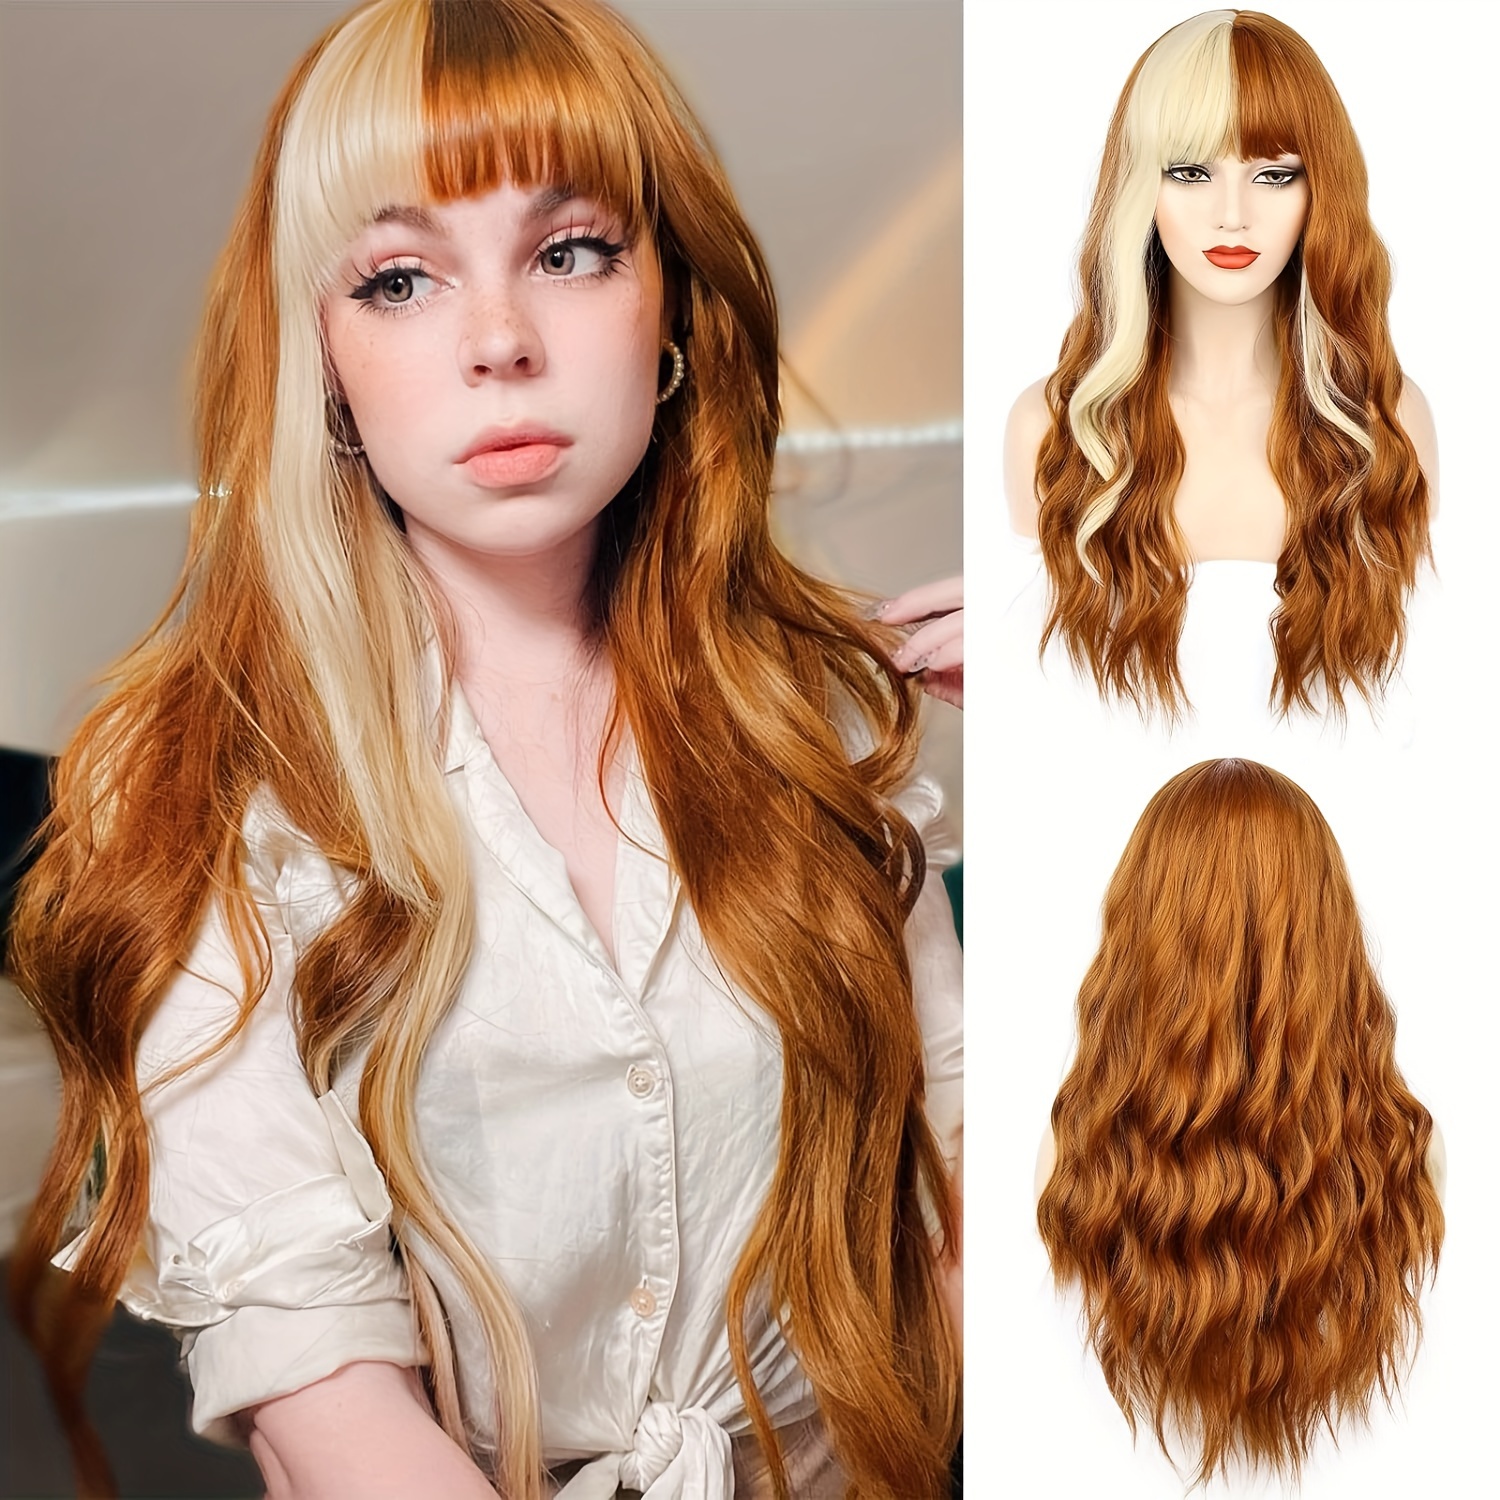 

Orange Wig With Bangs Long Orange Wavy Wigs For Women Orange And Blonde Wig Synthetic Heat Resistant Wave Wig For Daily Party Cosplay Use (26inch)